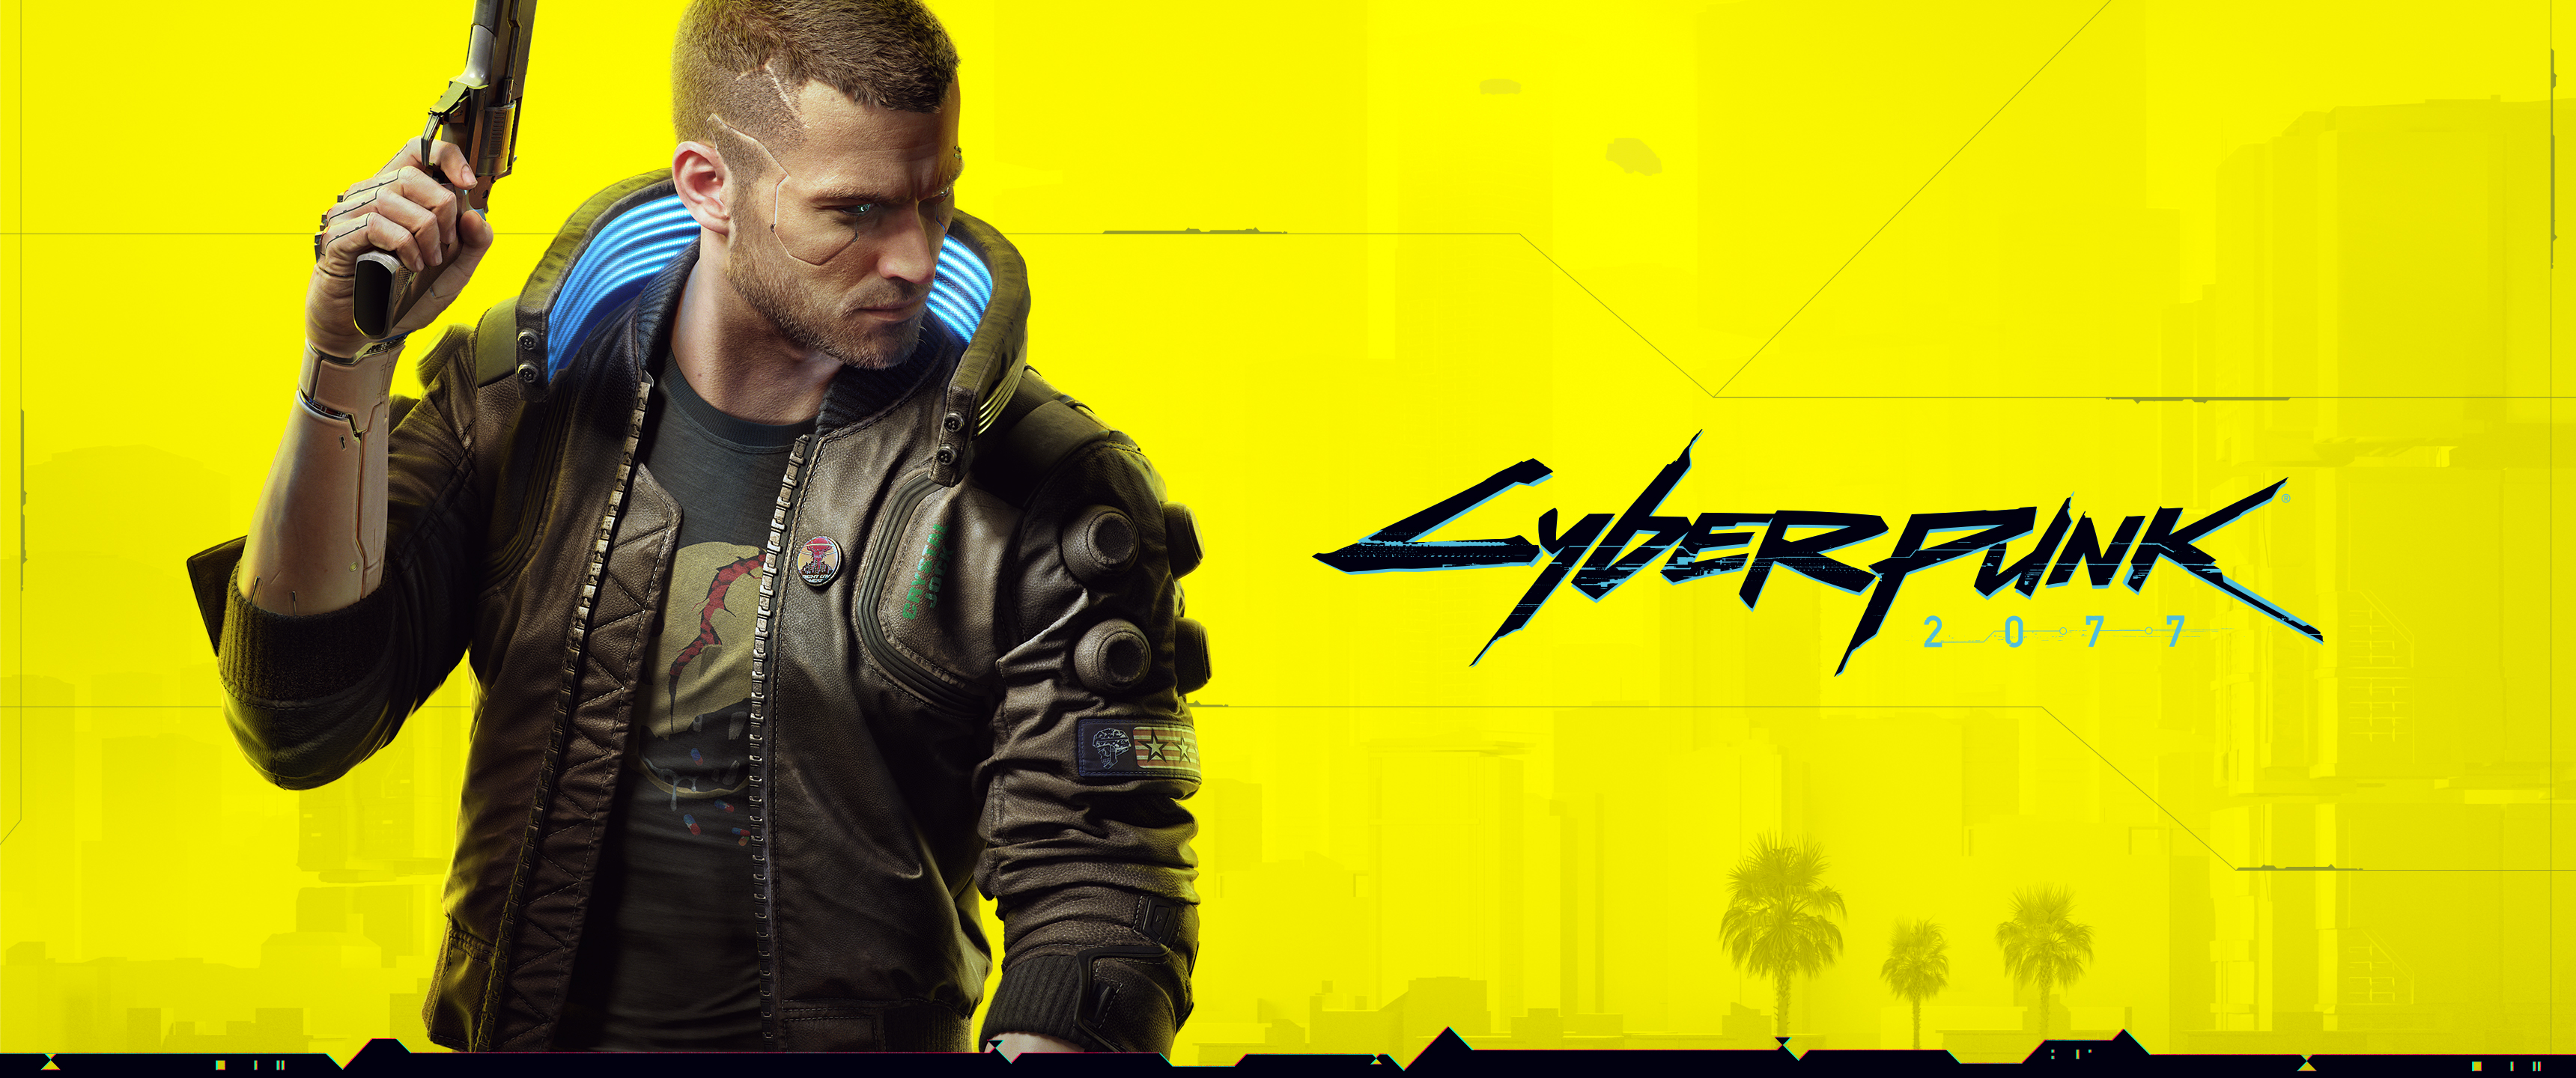 General 3440x1440 Cyberpunk 2077 game posters yellow background simple background weapon video games PC gaming